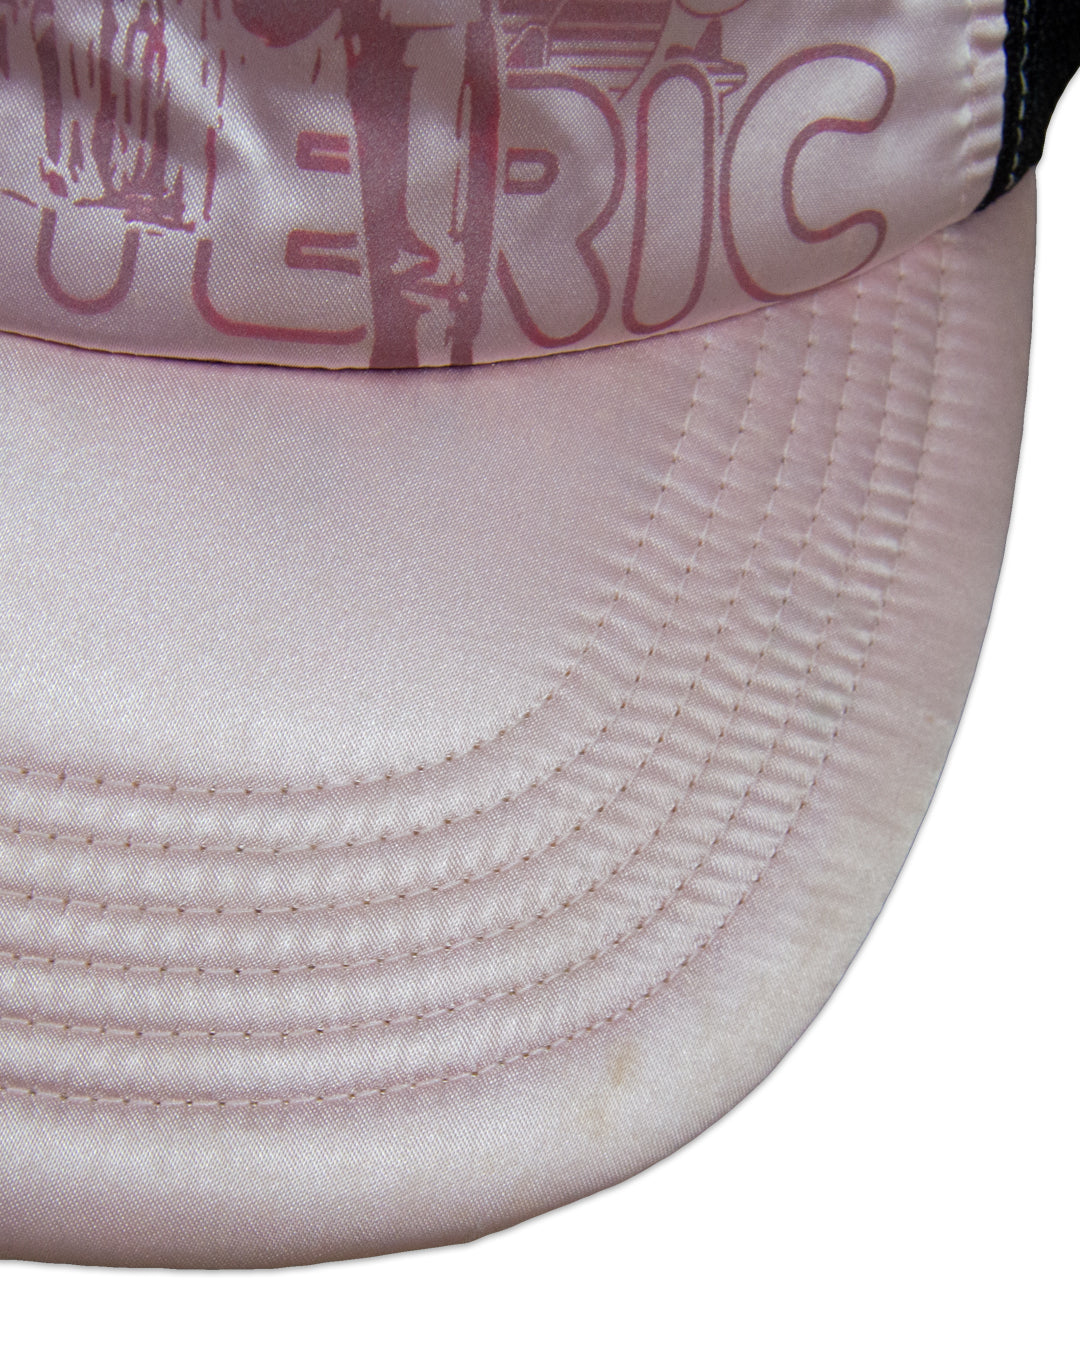 Hysteric Glamour Retro Pin Up Logo Trucker Hat